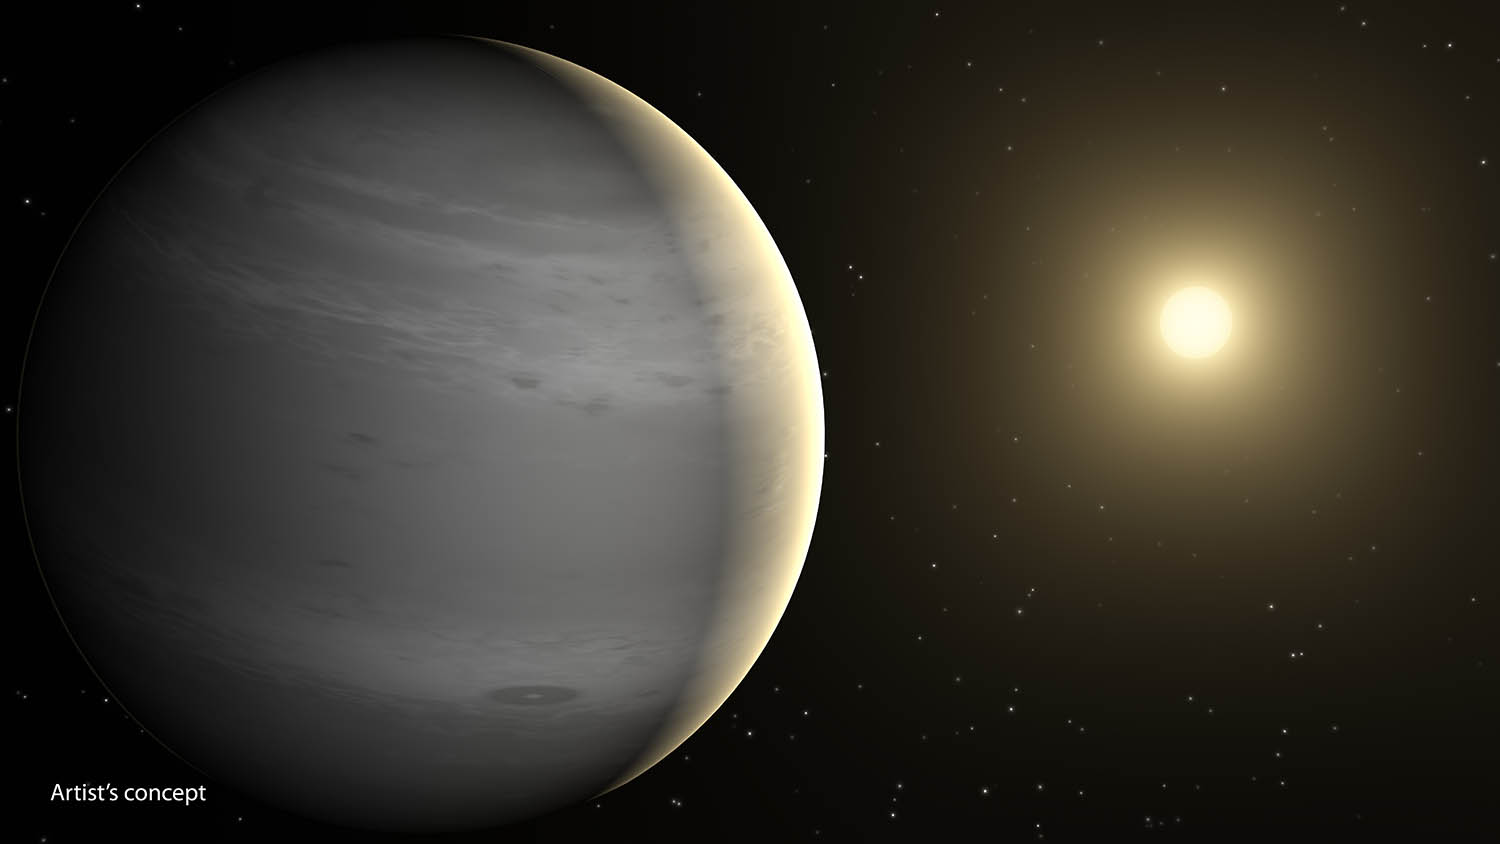 Artist's concept of the exoplanet Gliese 436b as it might look like to our eyes. Since the planet's atmospheric hydrogen is being depleted with time leaving behind a helium-dominated atmosphere, scientists predict that Gliese 436b would appear covered in white or gray clouds. Image Credit: NASA/JPL-Caltech